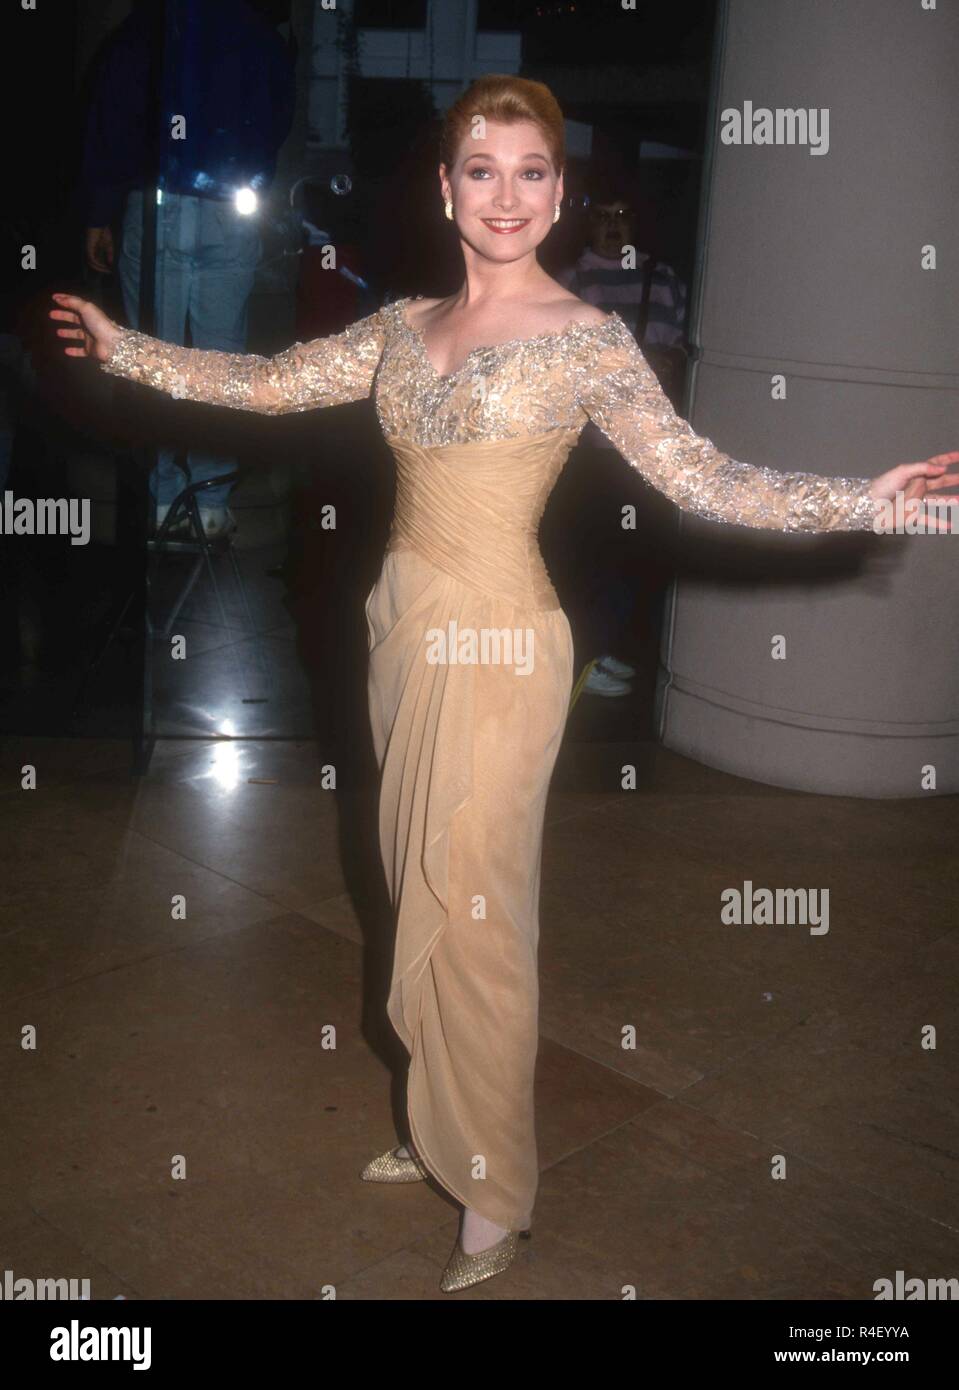 BEVERLY HILLS, CA - FEBRUARY 26: Actress Melissa Reeves attends the Ninth Annual Soap Opera Digest Awards on February 26, 1993 at the Beverly Hilton Hotel in Beverly Hills, California. Photo by Barry King/Alamy Stock Photo Stock Photo